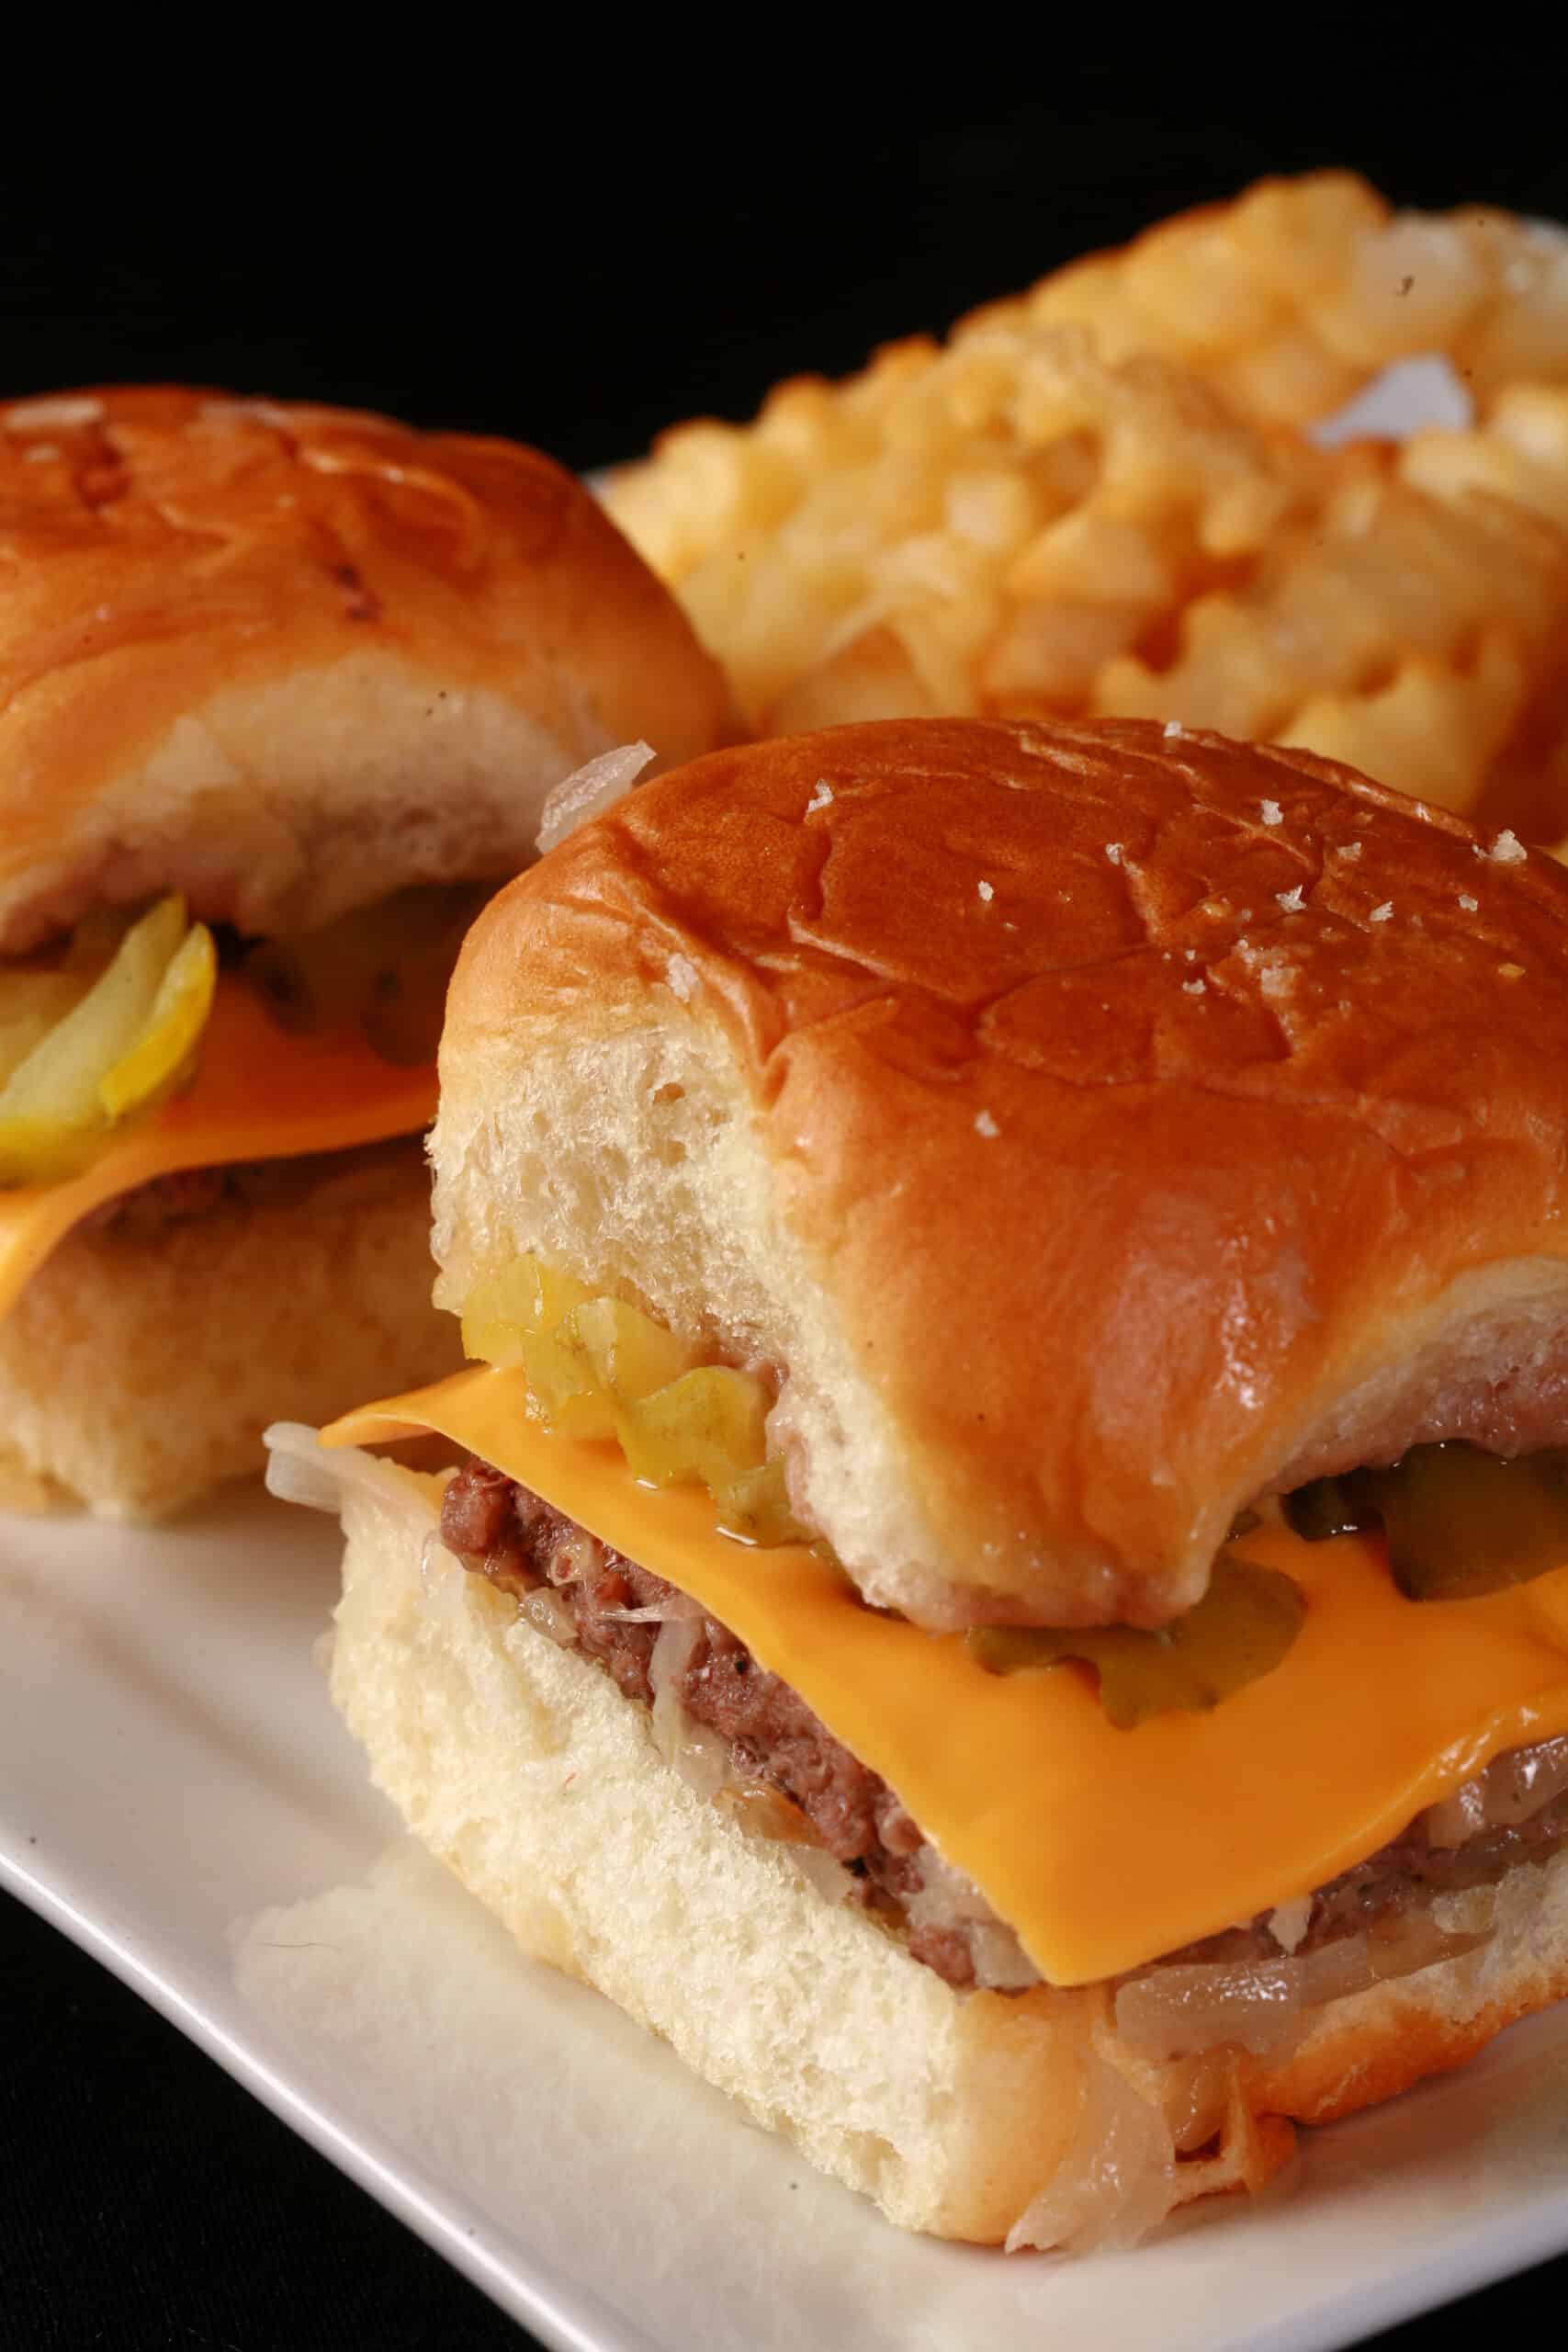 A plate of 3 homemade white castle sliders on a plate with crinkle cut fries.